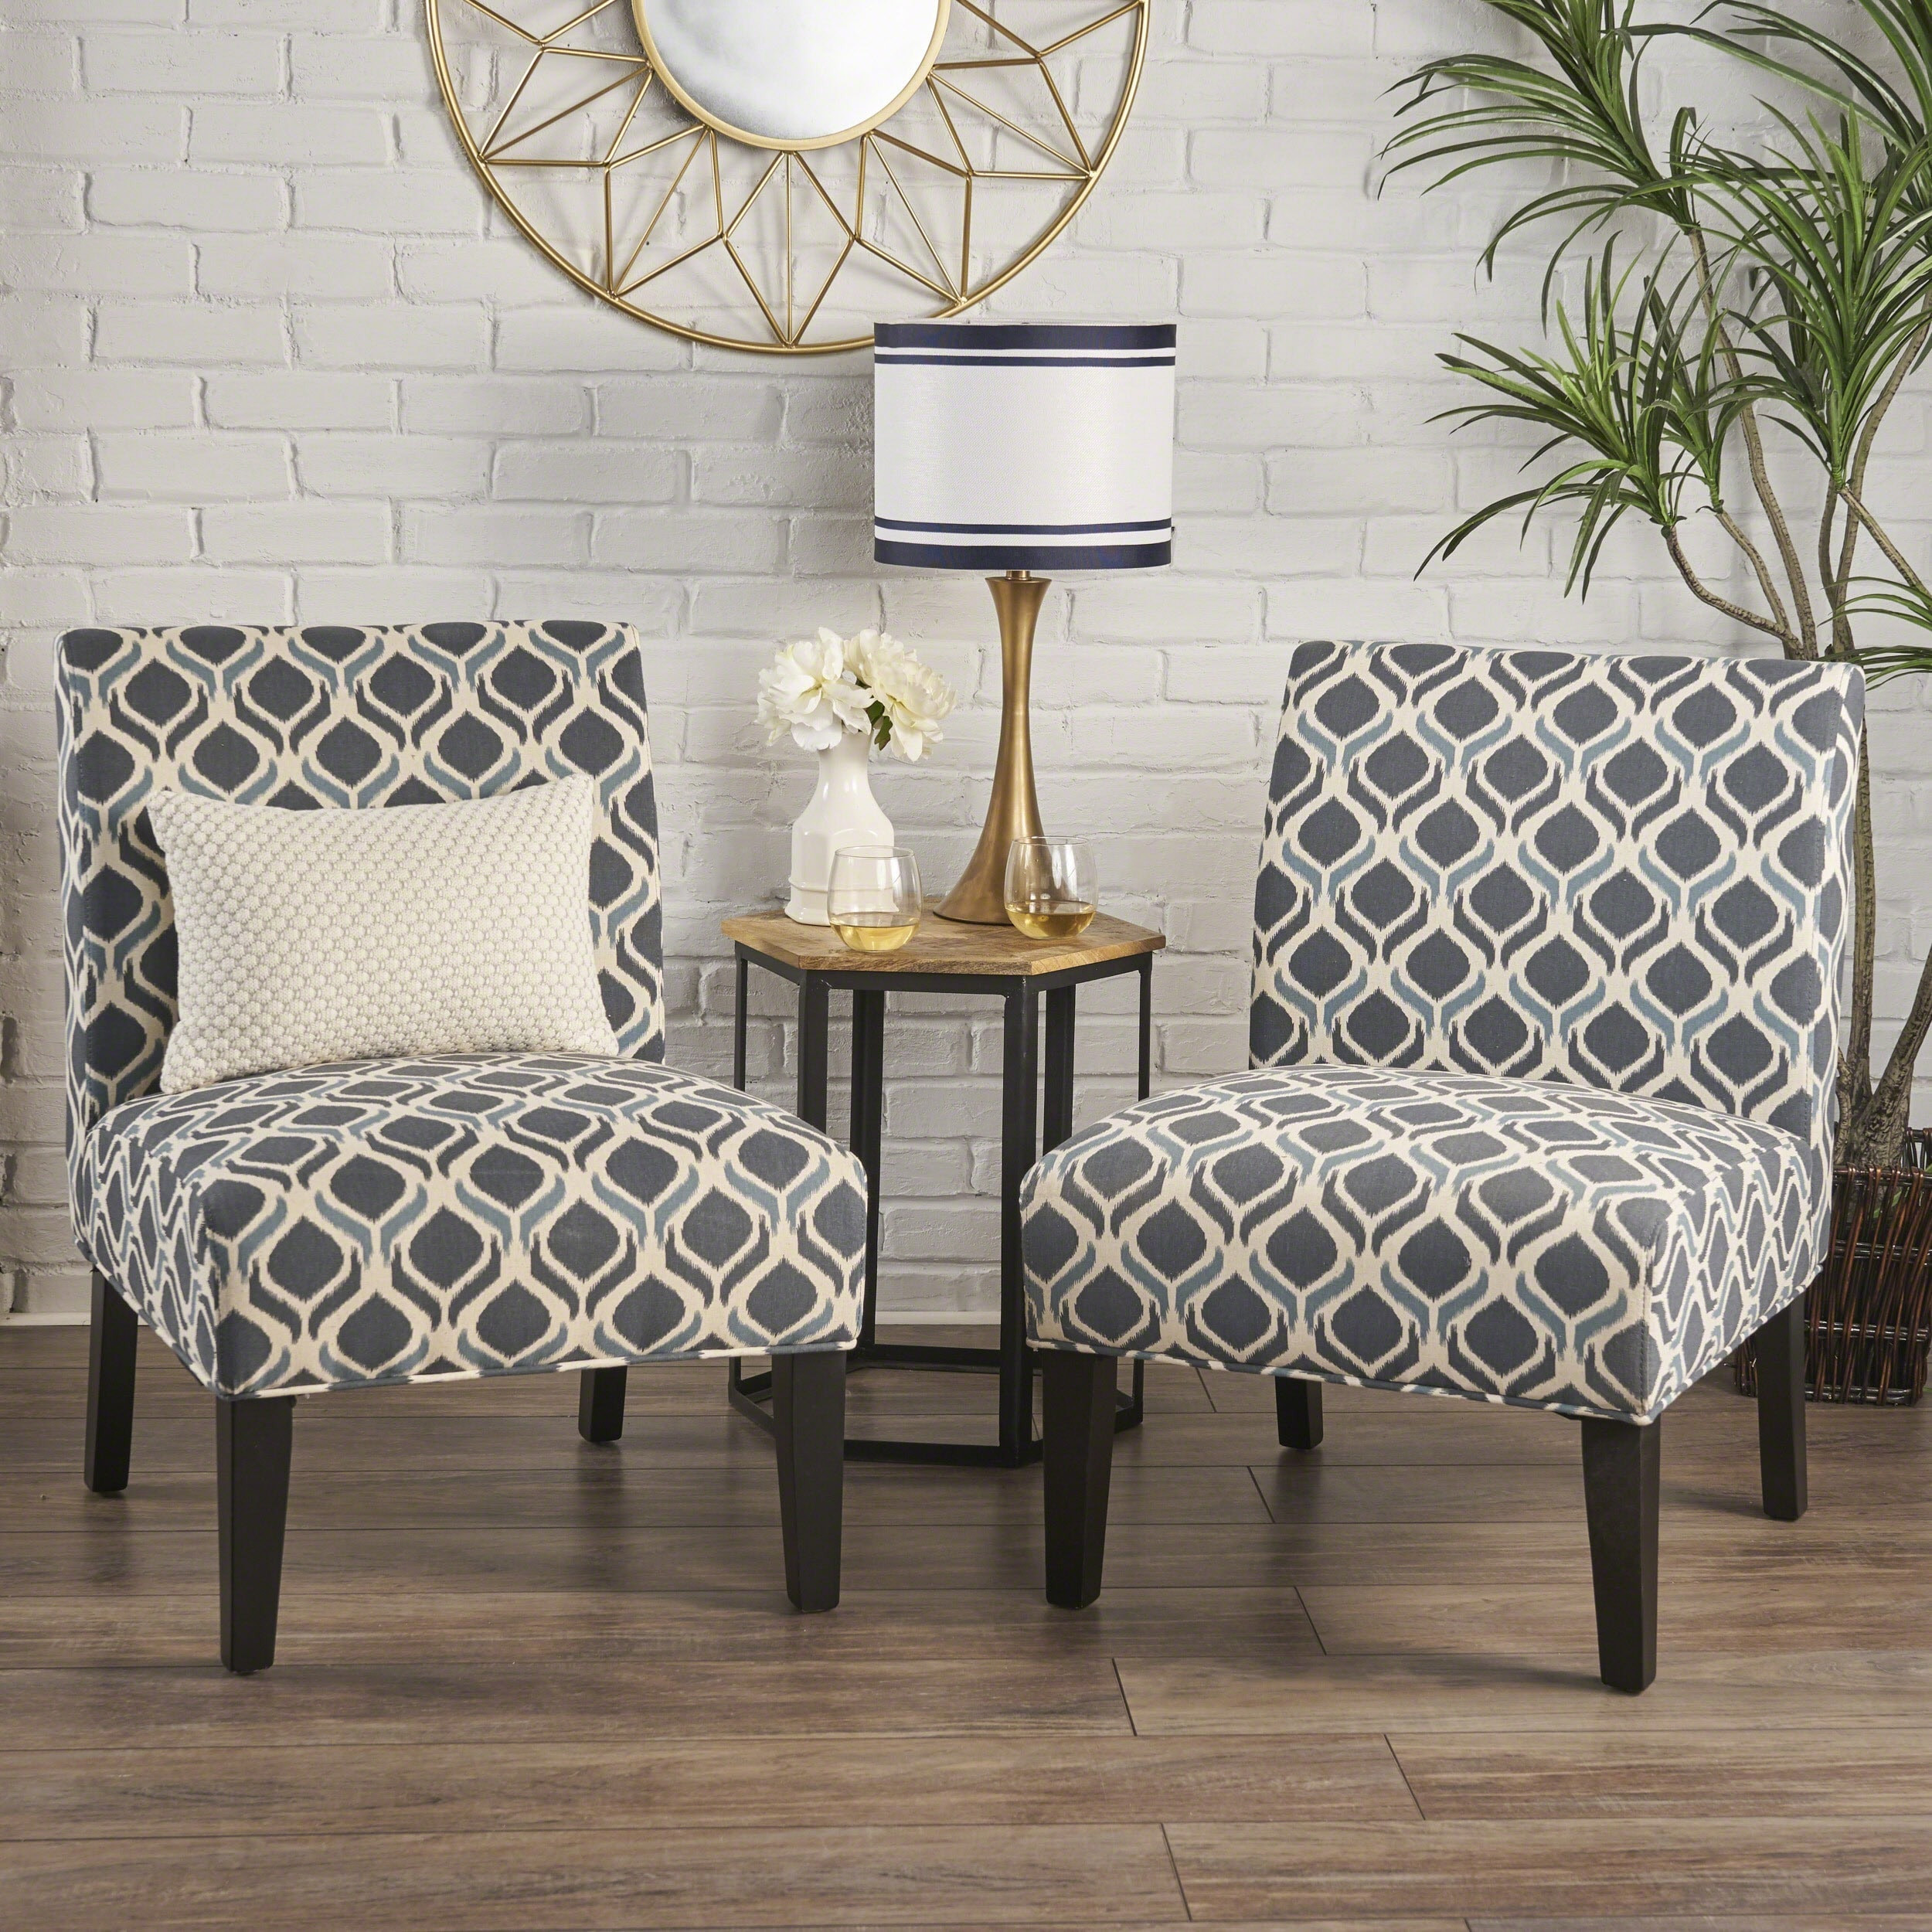 Occasional Chairs For Living Room
 Accent Chairs For Living Room Set 2 Soft Sturdy Armless